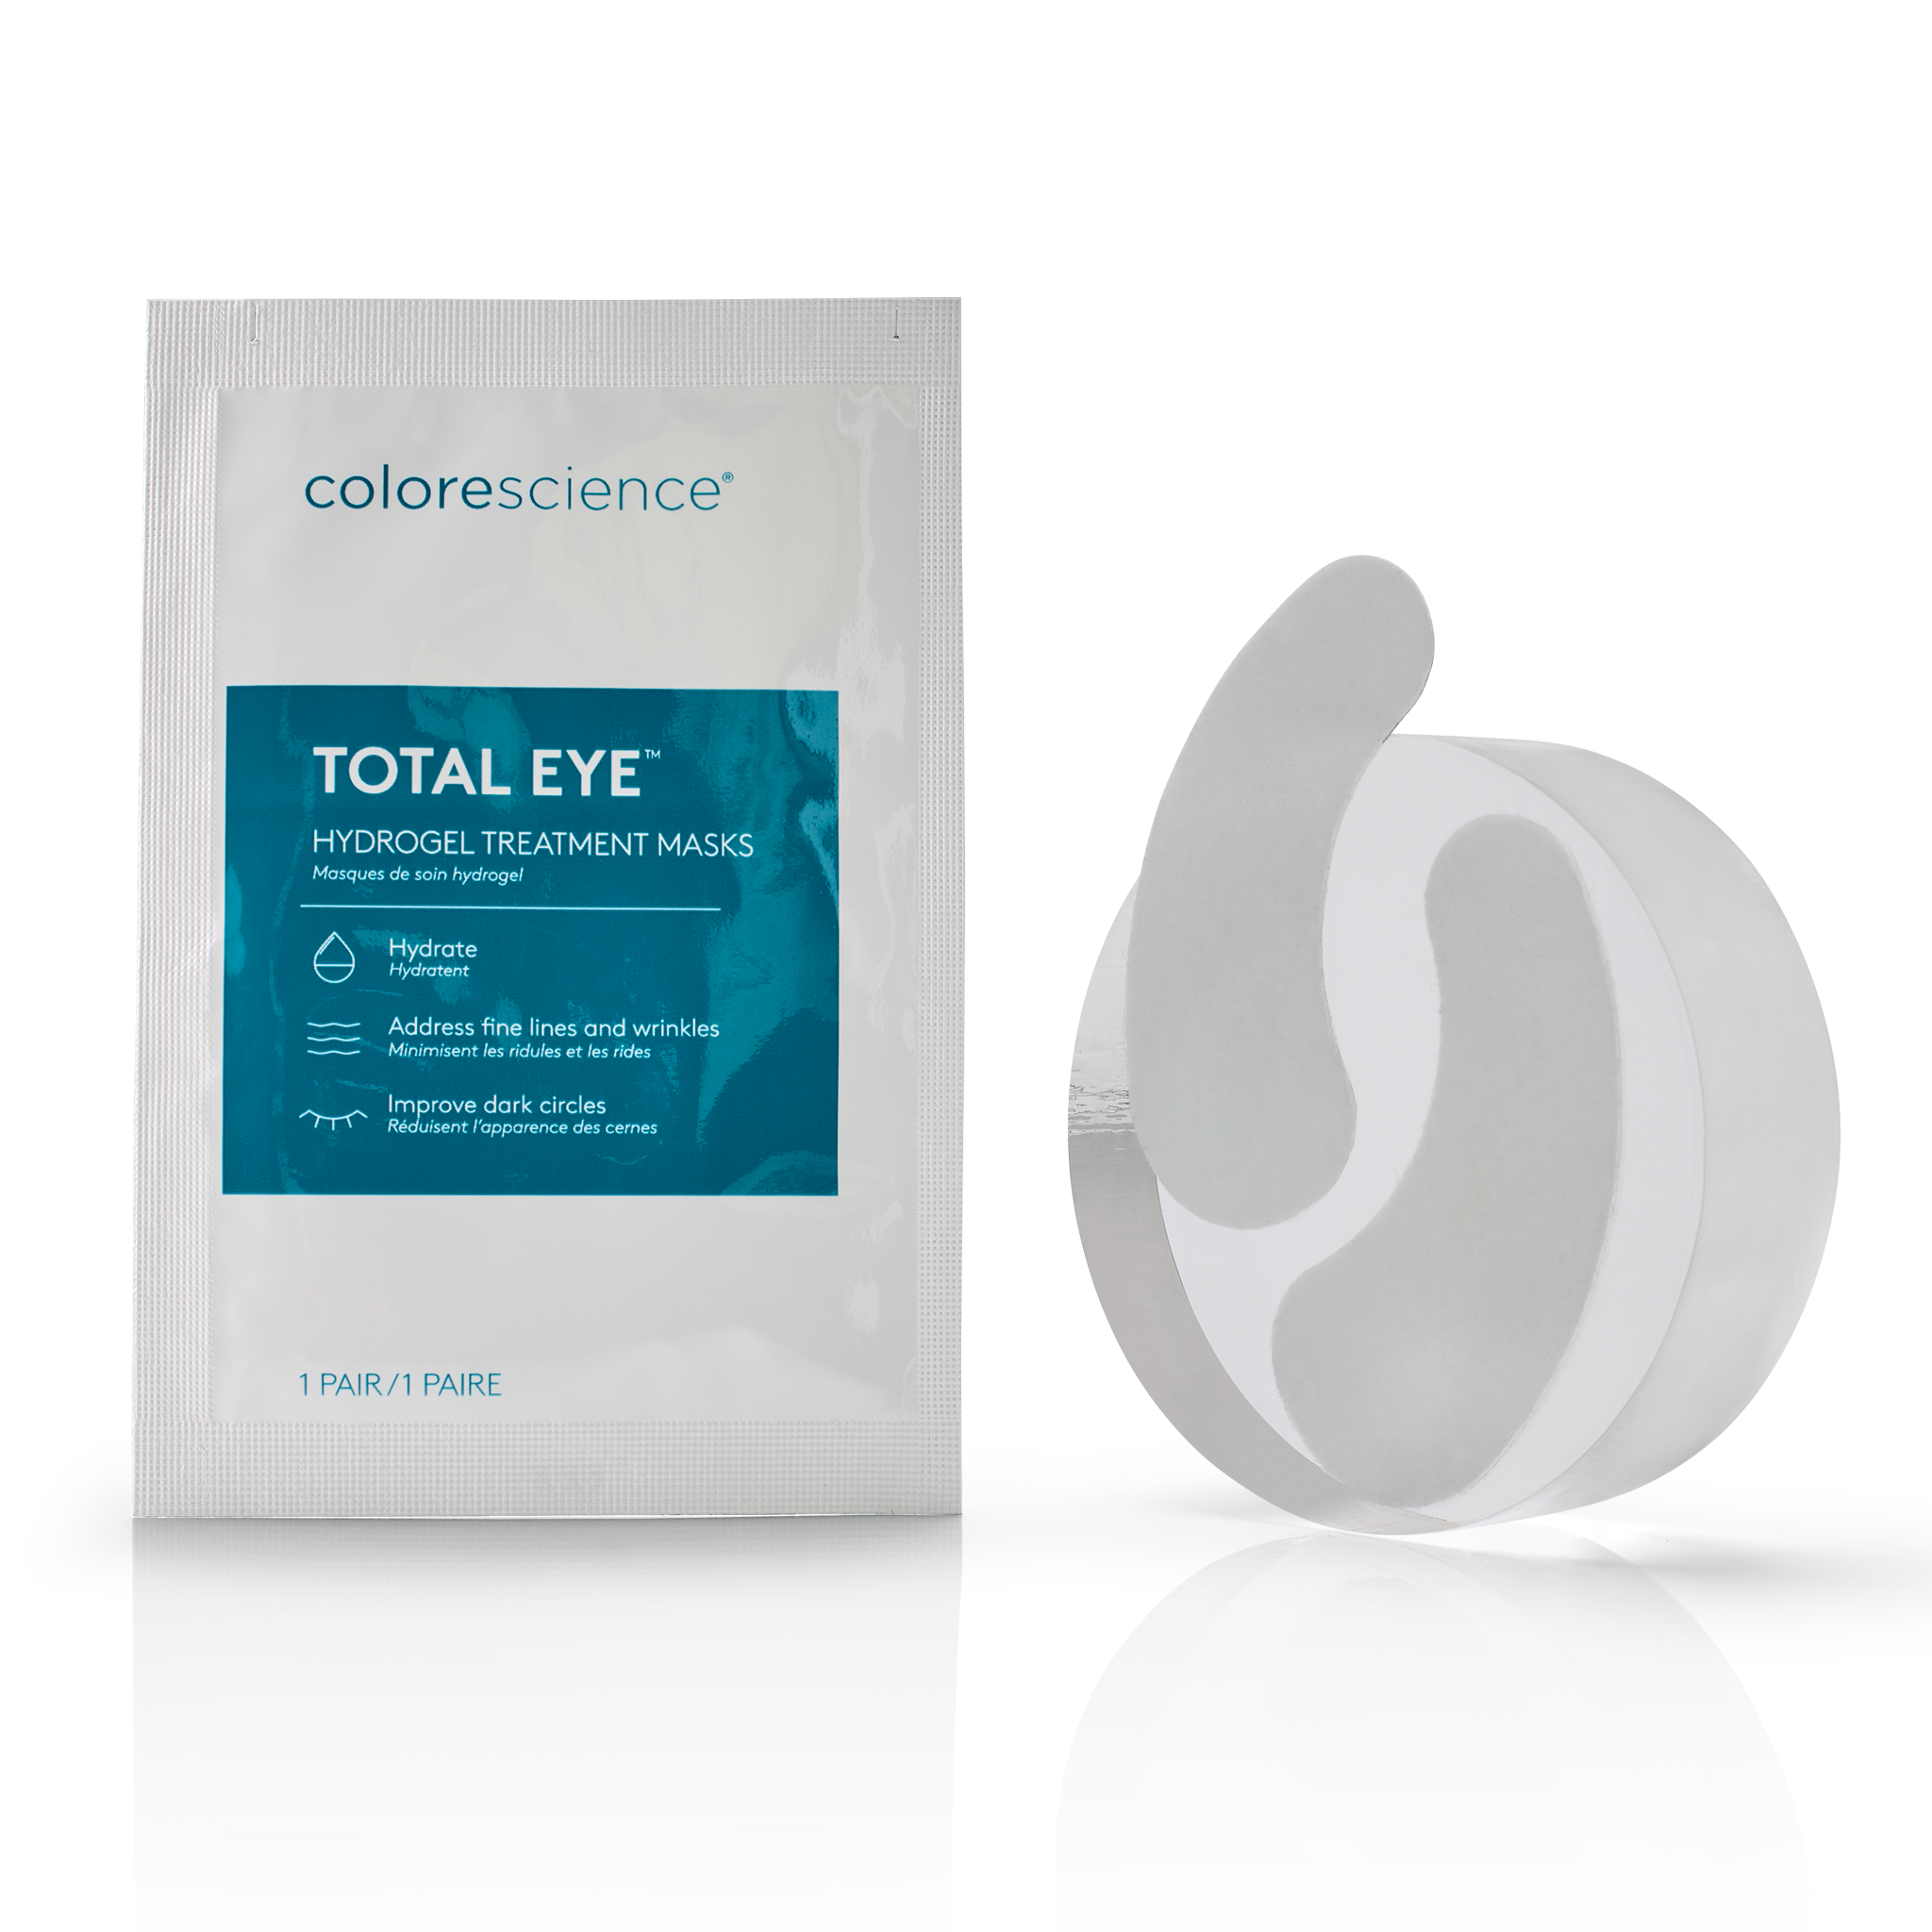 total eye hydrogel masks in packaging and one paid of mask outside of packaging || all